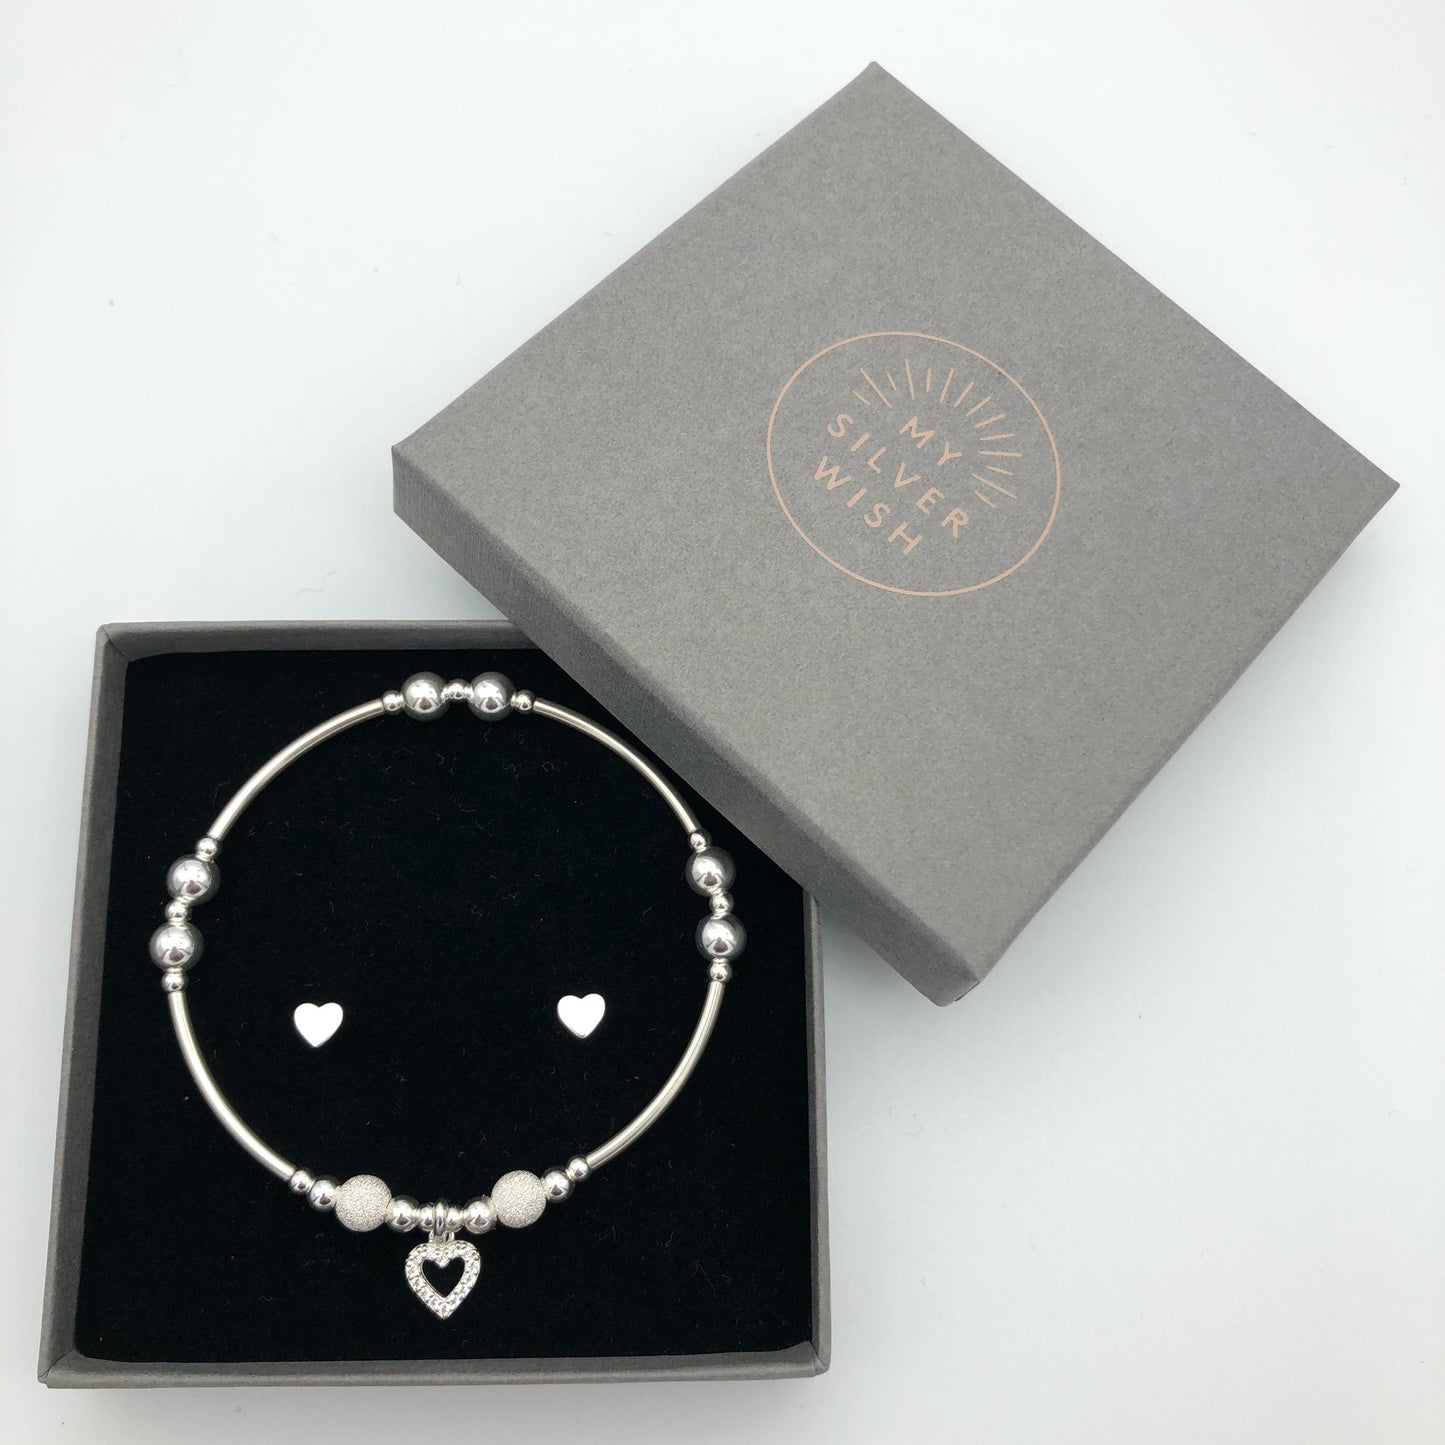 Diamond heart charm sterling silver hand-made women's stacking bracelet and earring gift set